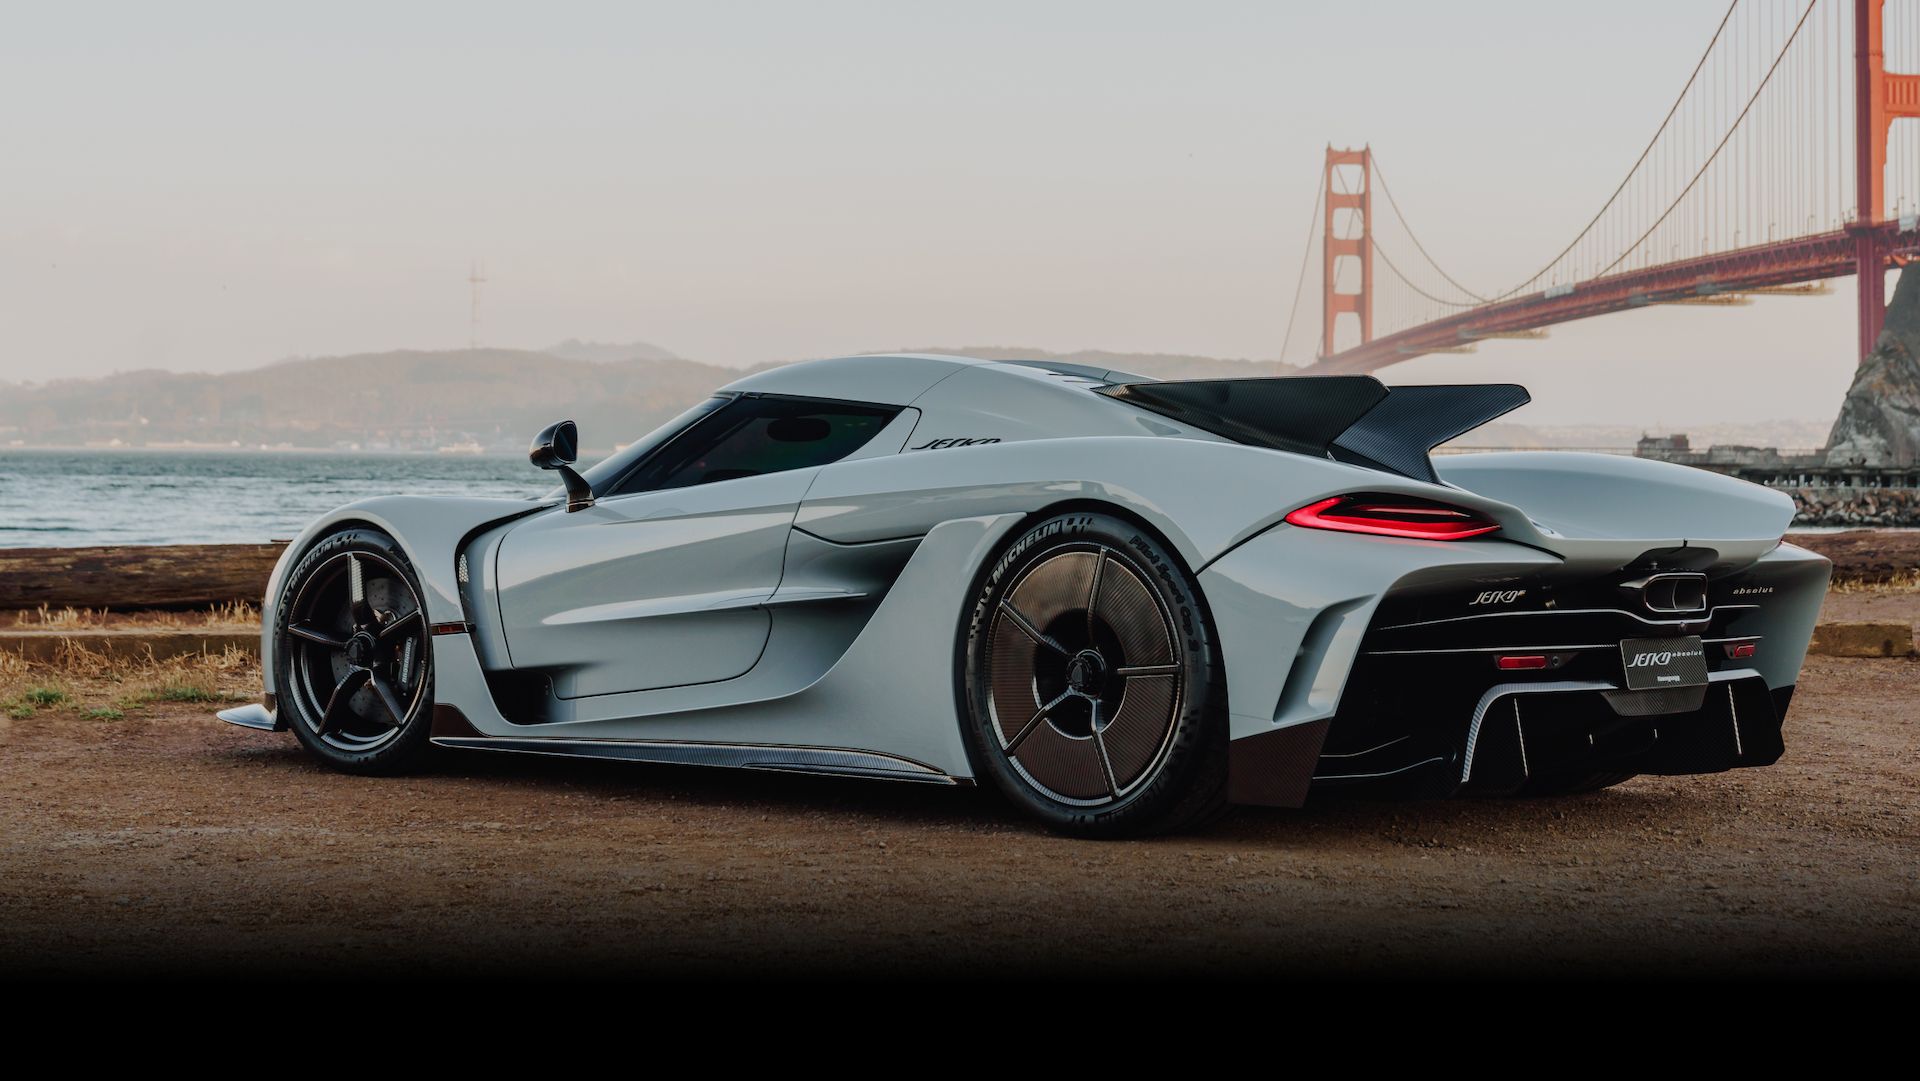 2021 Rimac Nevera electric hypercar revealed with sub-2.0 second  acceleration - Drive